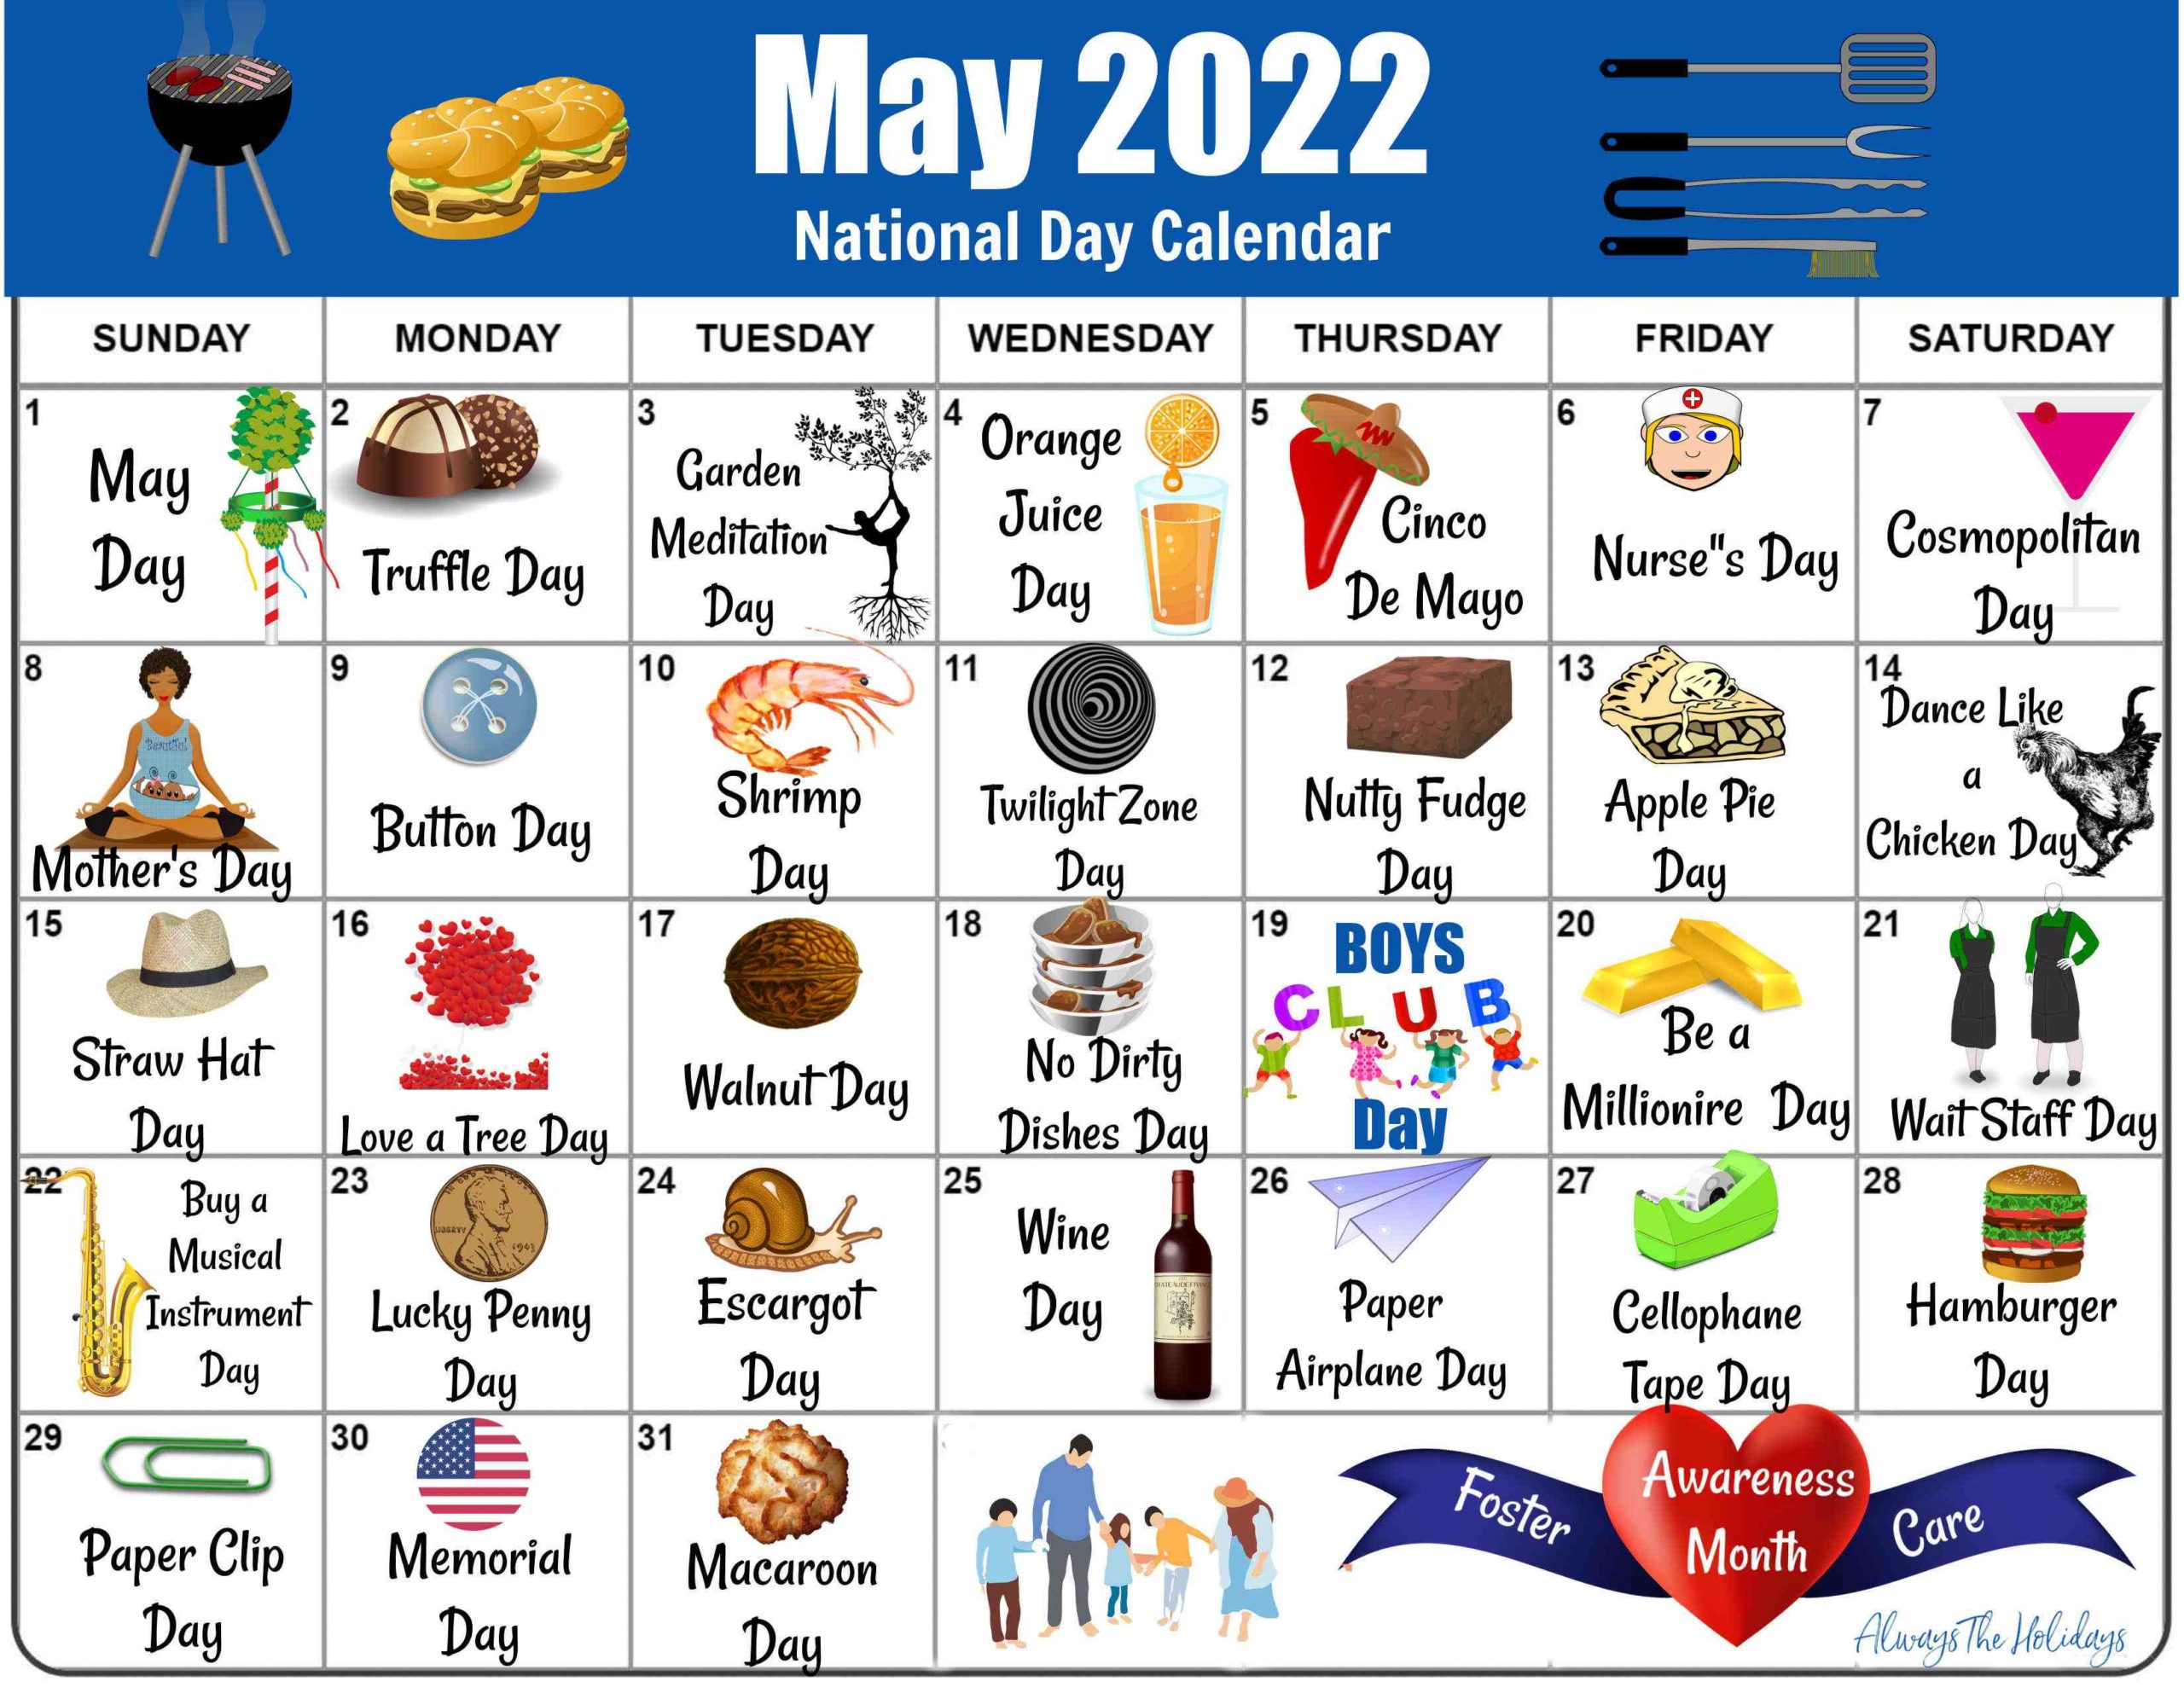 National Day Calendar May 2022 May National Day Calendar - Free Printable - Always The Holidays